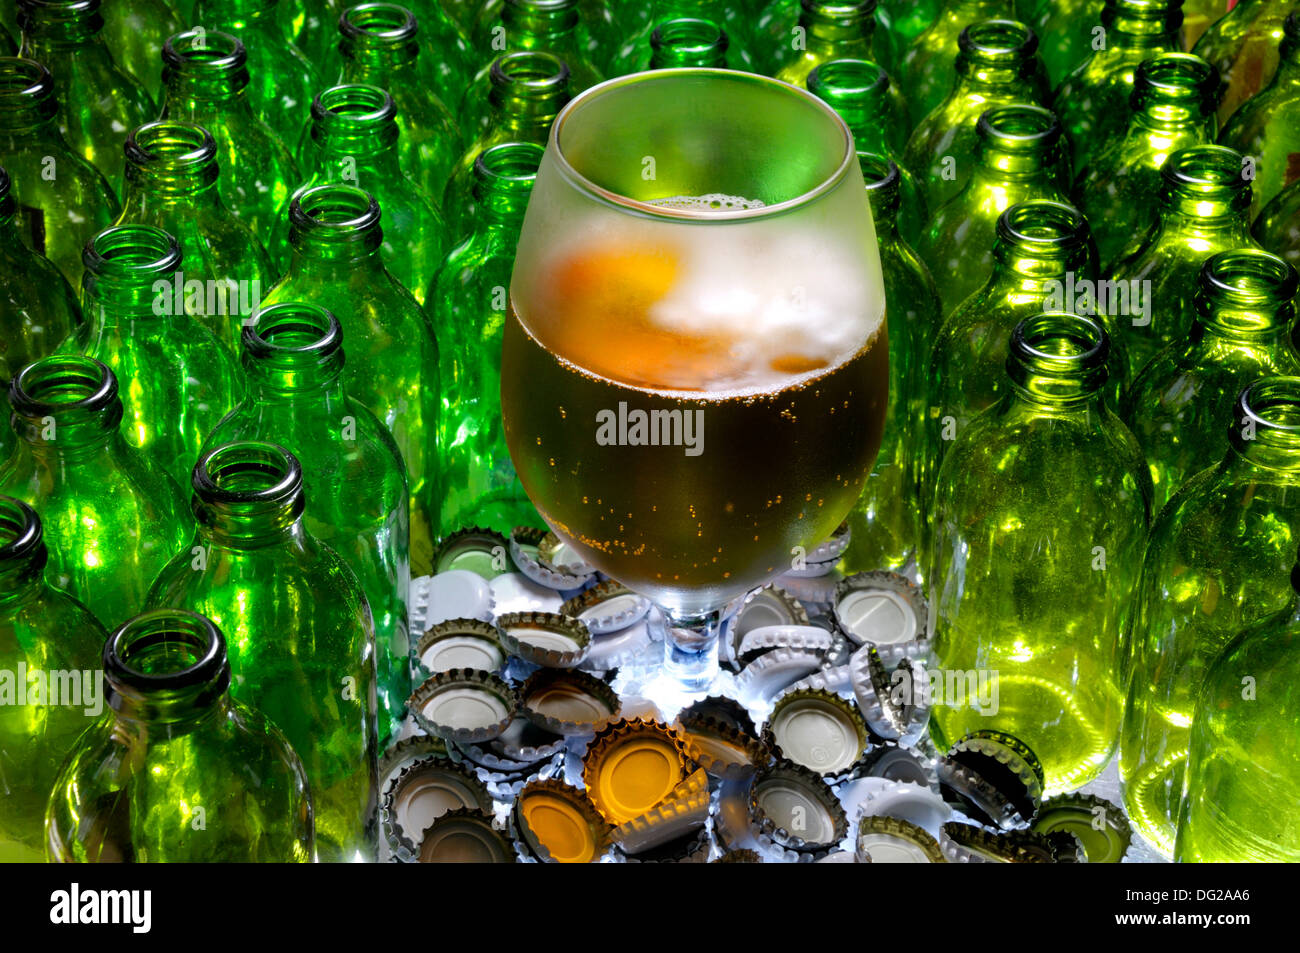 Glass of beer with empty bottles and caps Stock Photo